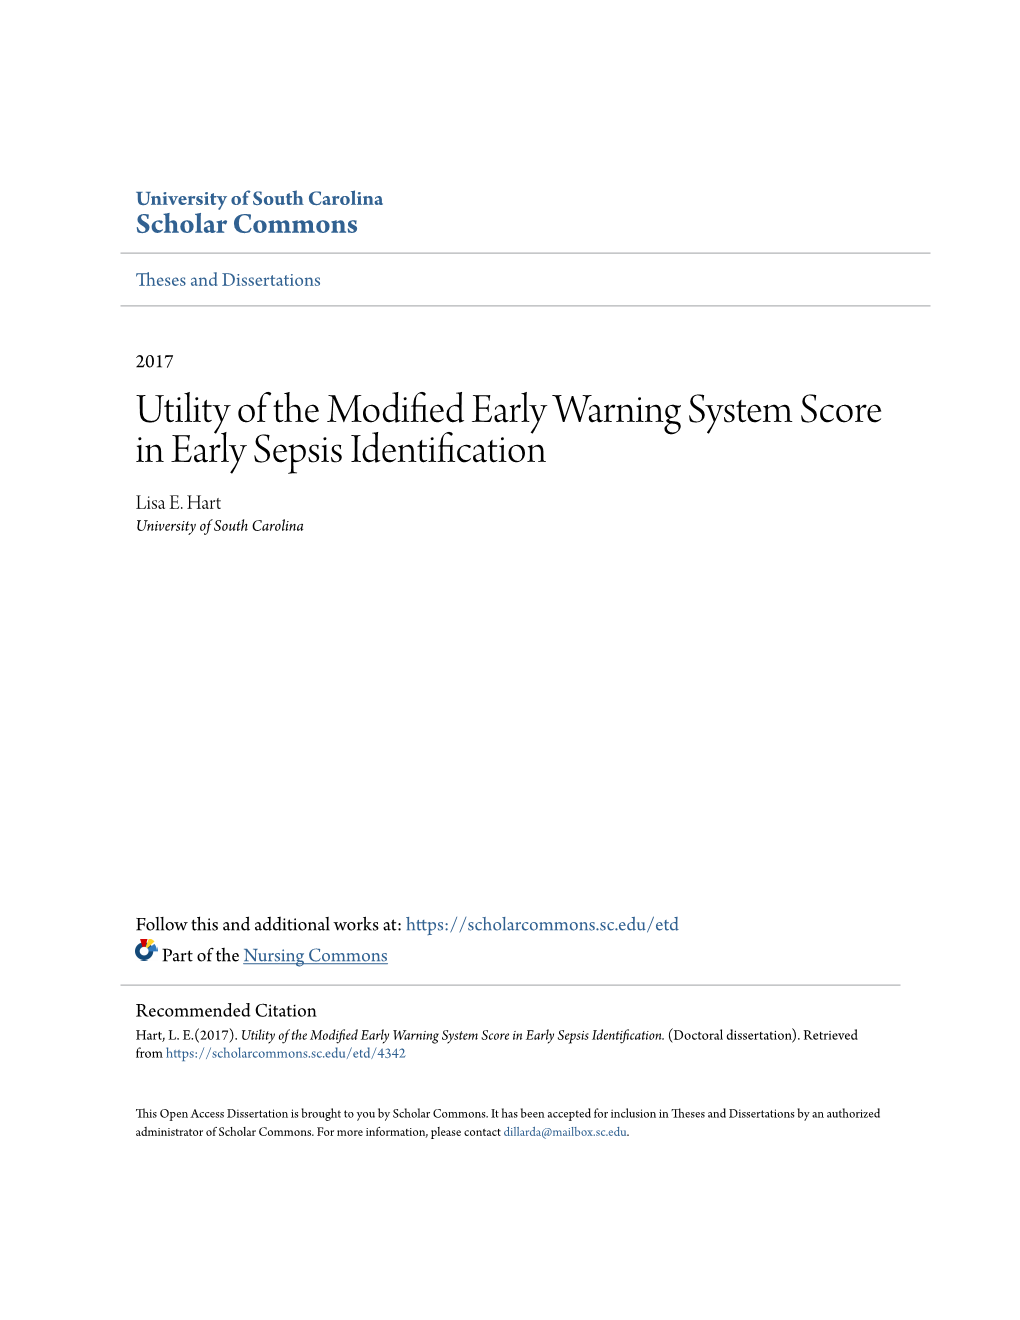 Utility of the Modified Early Warning System Score in Early Sepsis Identification